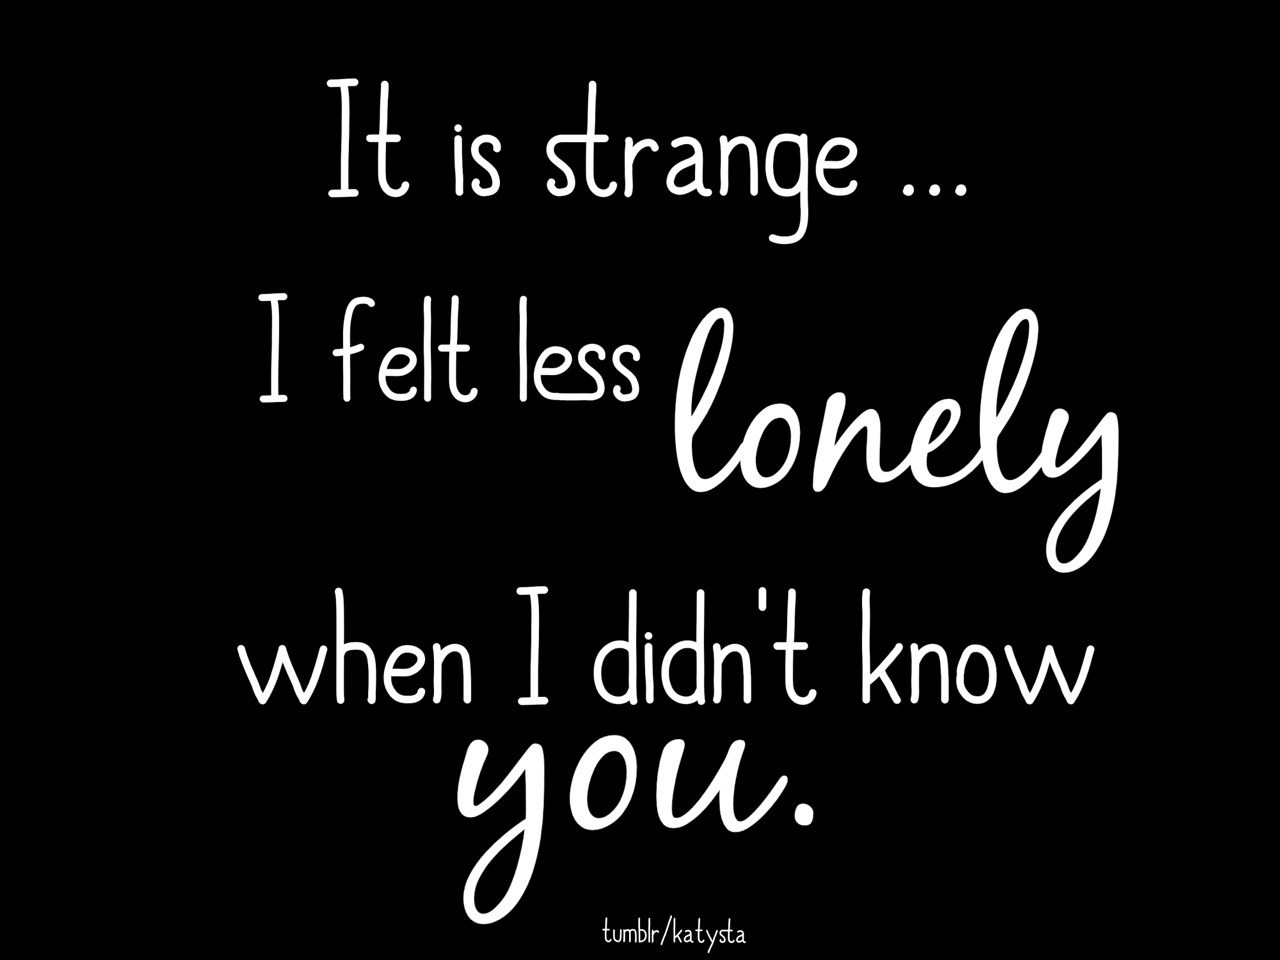 Source katysta i still love you love quotes life quotes quotation quoteoftheday quotes miss you quotes i miss you lonely loneliness left alone the struggle